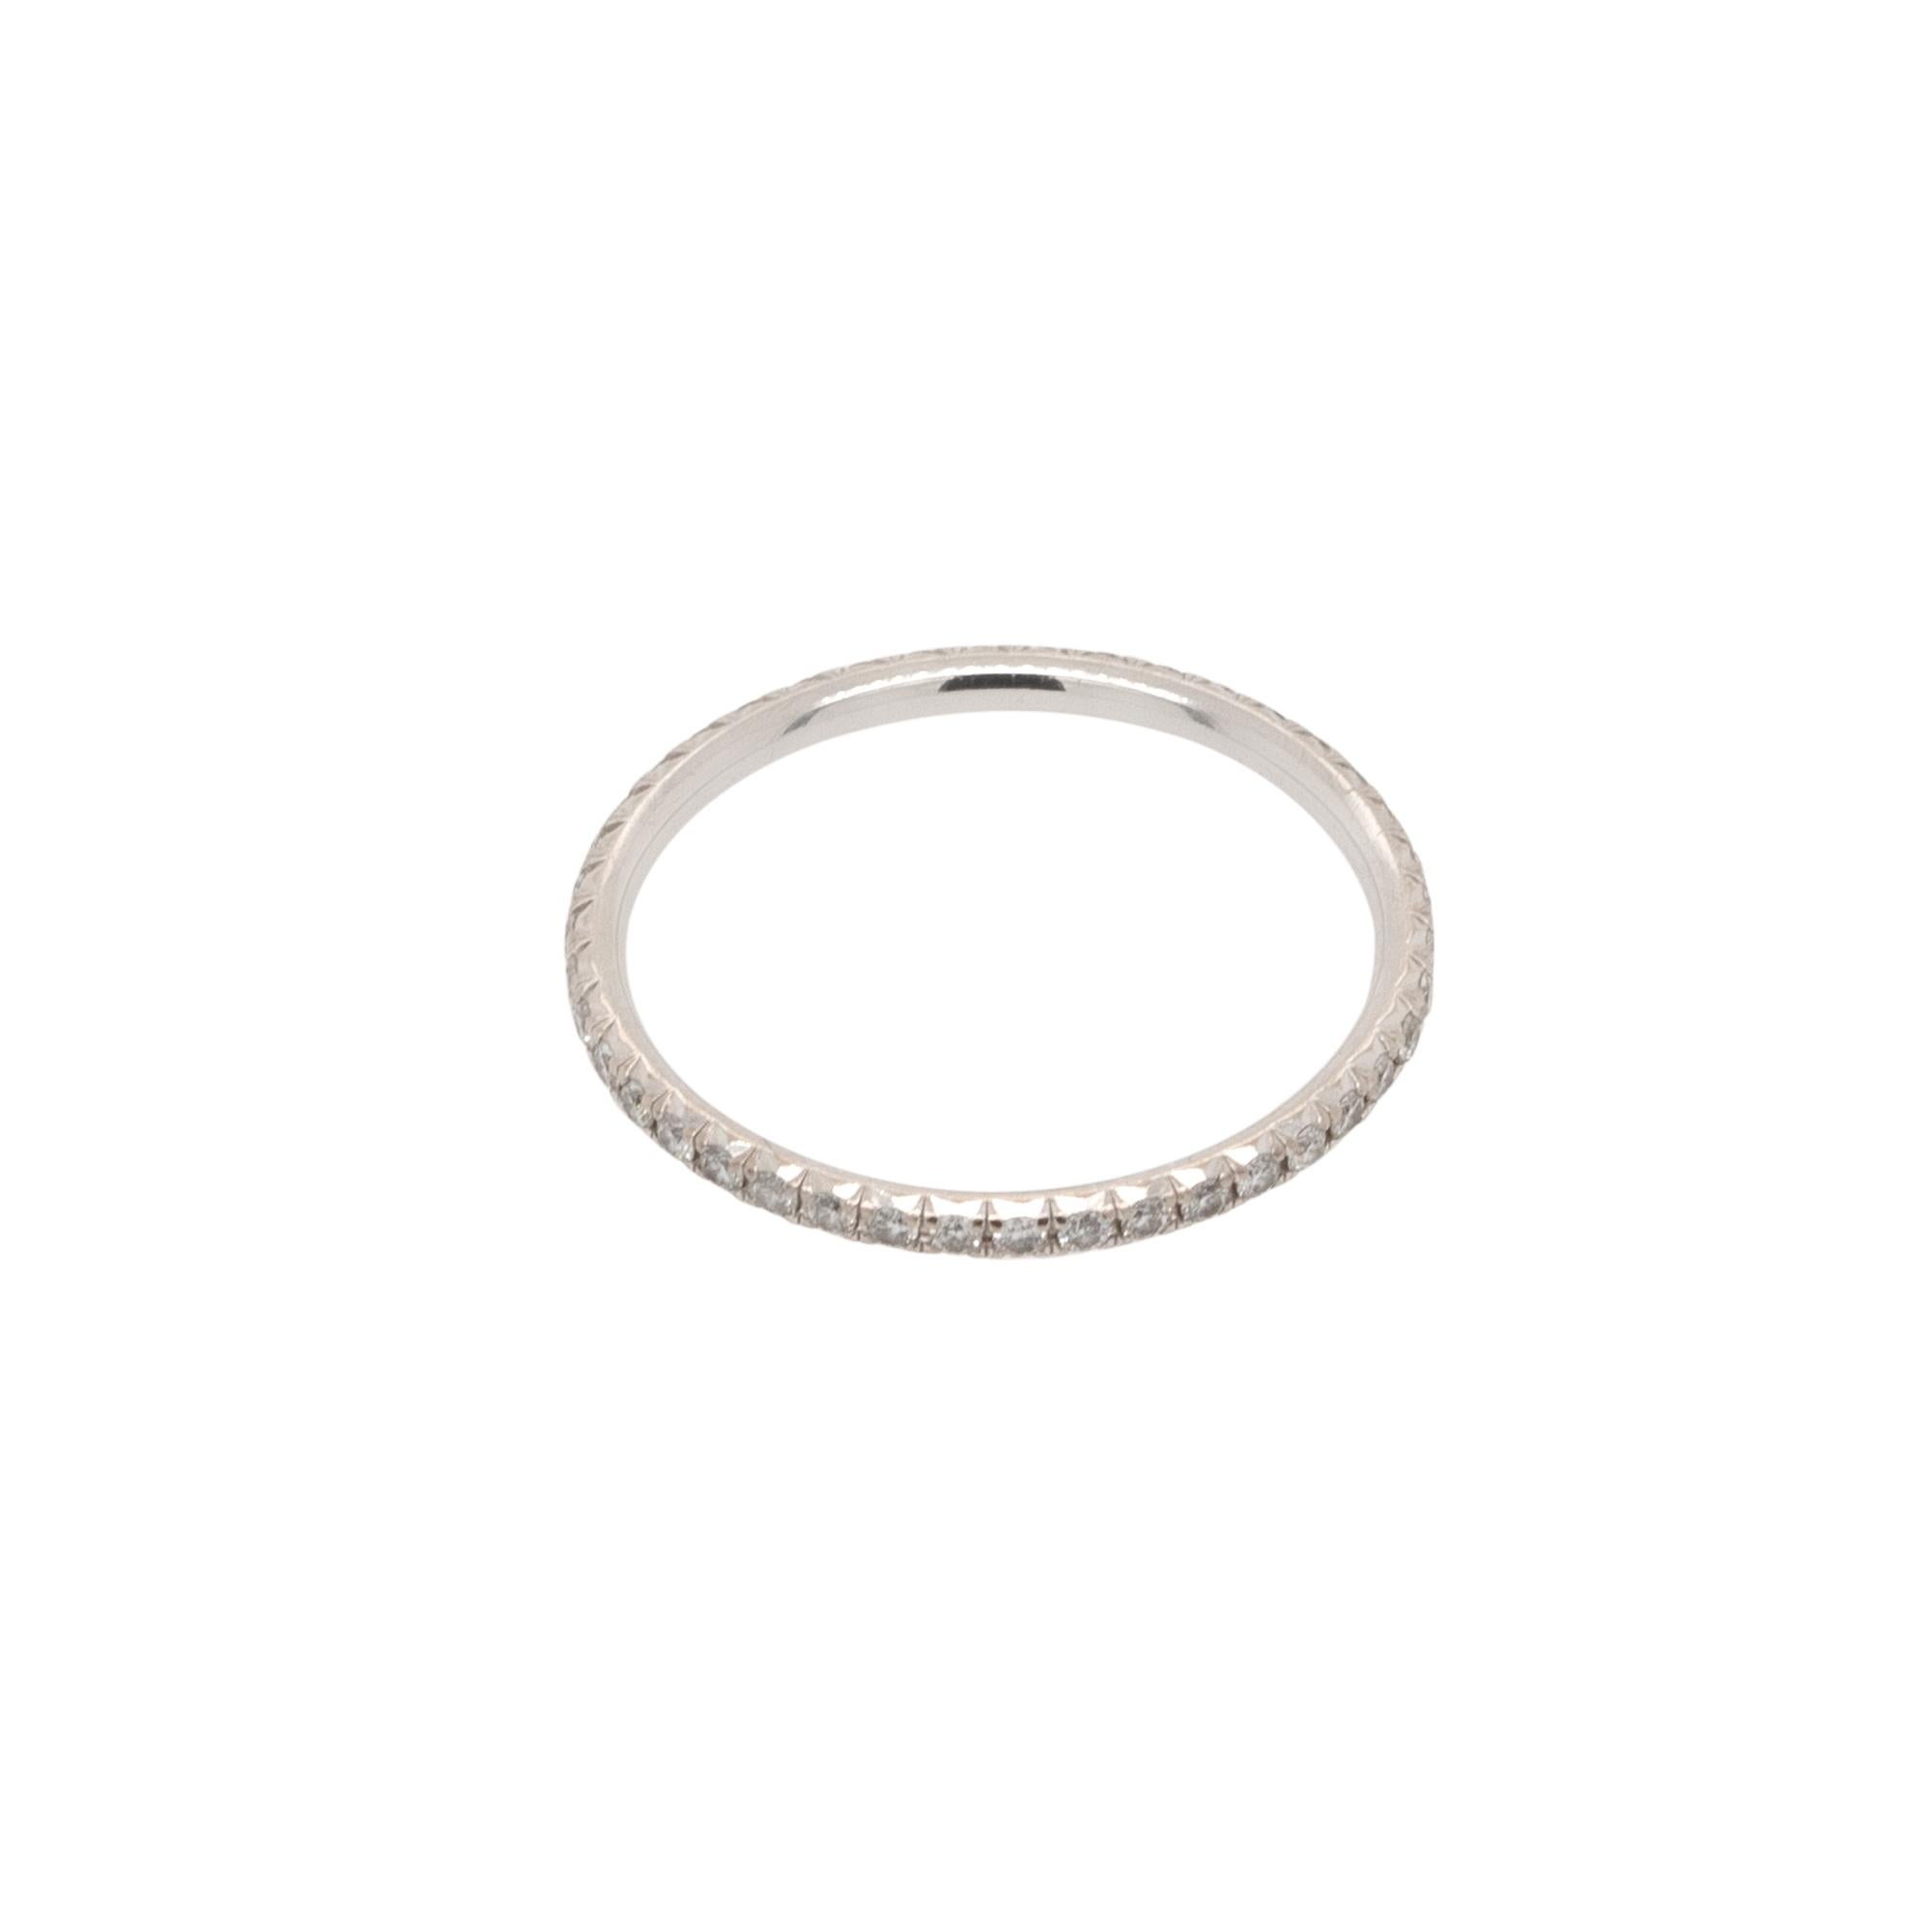 Tiffany & Co. 18k White Gold Diamond Stackable Band
The Tiffany & Co. 18k White Gold Diamond Stackable Band is an exquisite piece of jewelry known for its elegance and versatility. Crafted from luxurious 18k white gold, it features a stunning row of